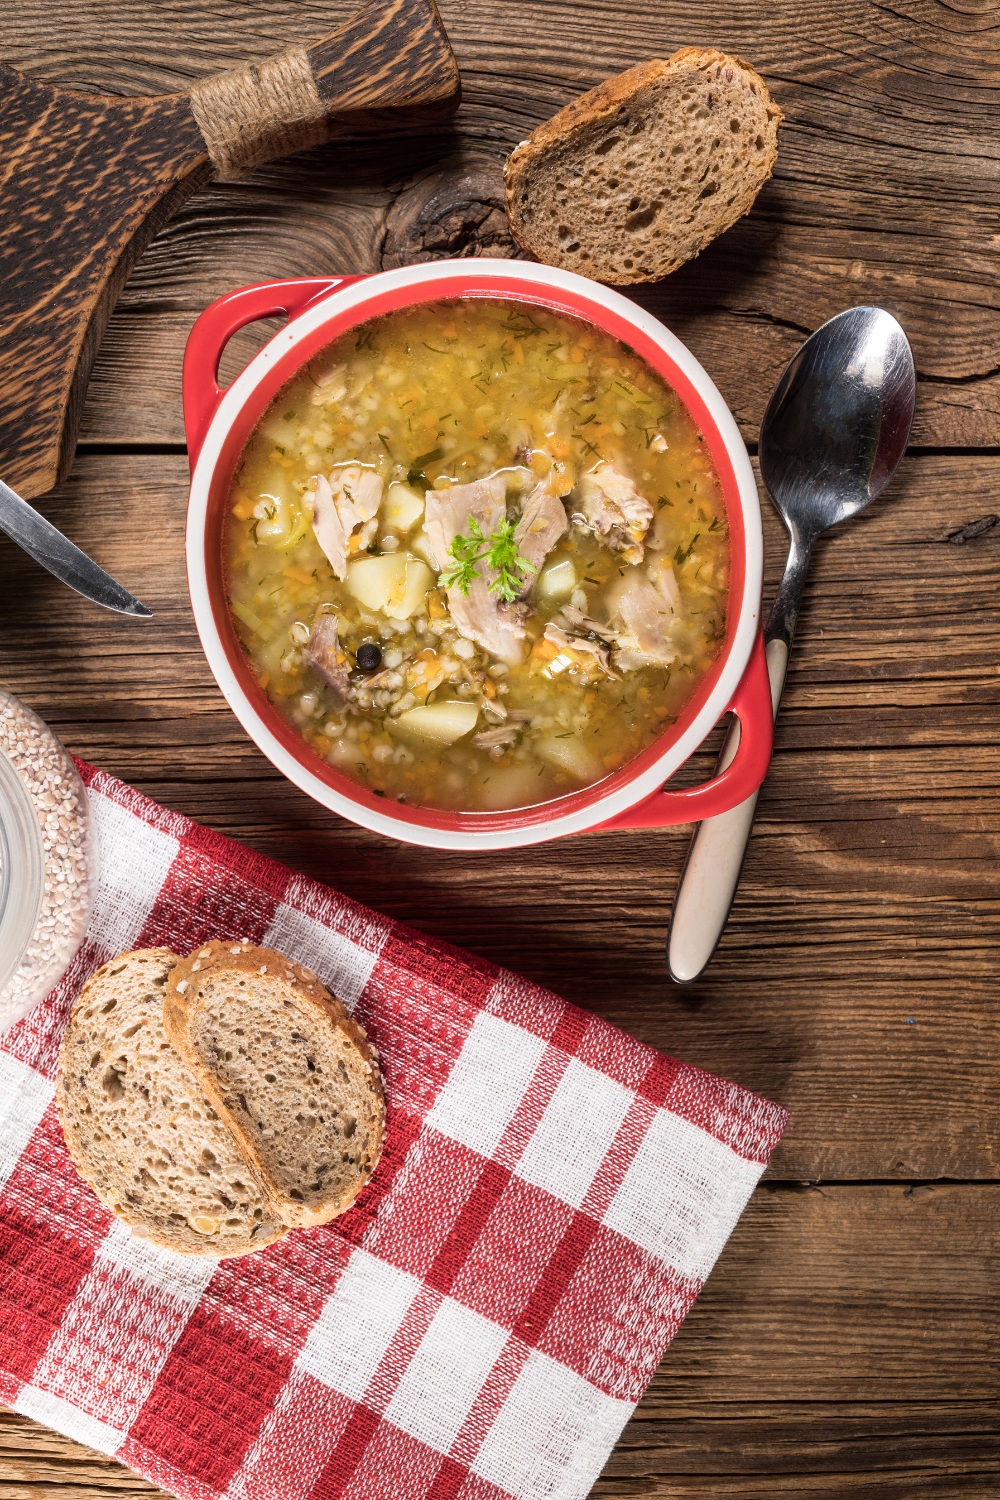 chicken barley soup in a red bowl with a slice of bread on the side.